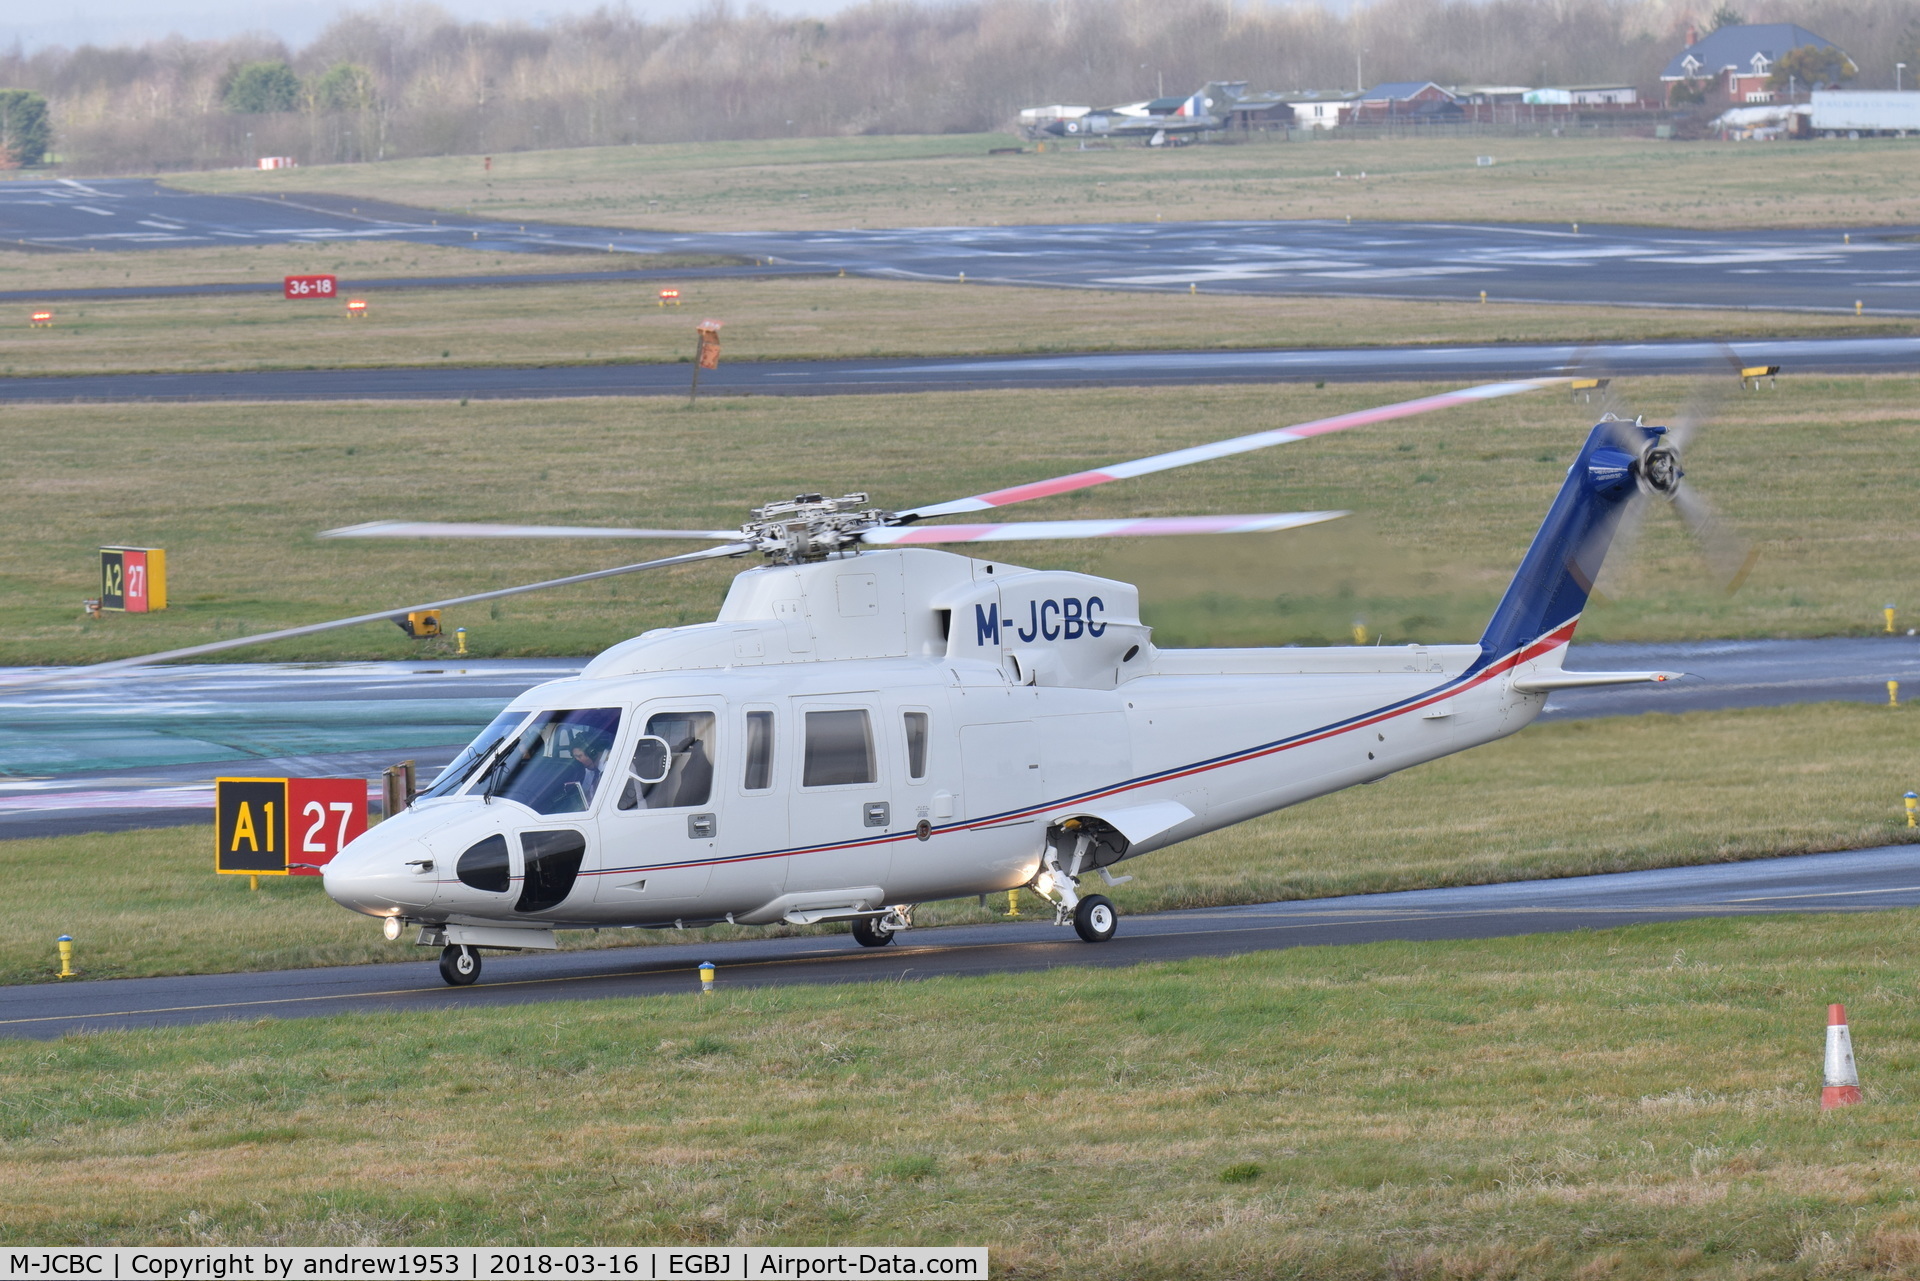 M-JCBC, 2006 Sikorsky S-76C C/N 760616, M-JCBC at Gloucestershire Airport.